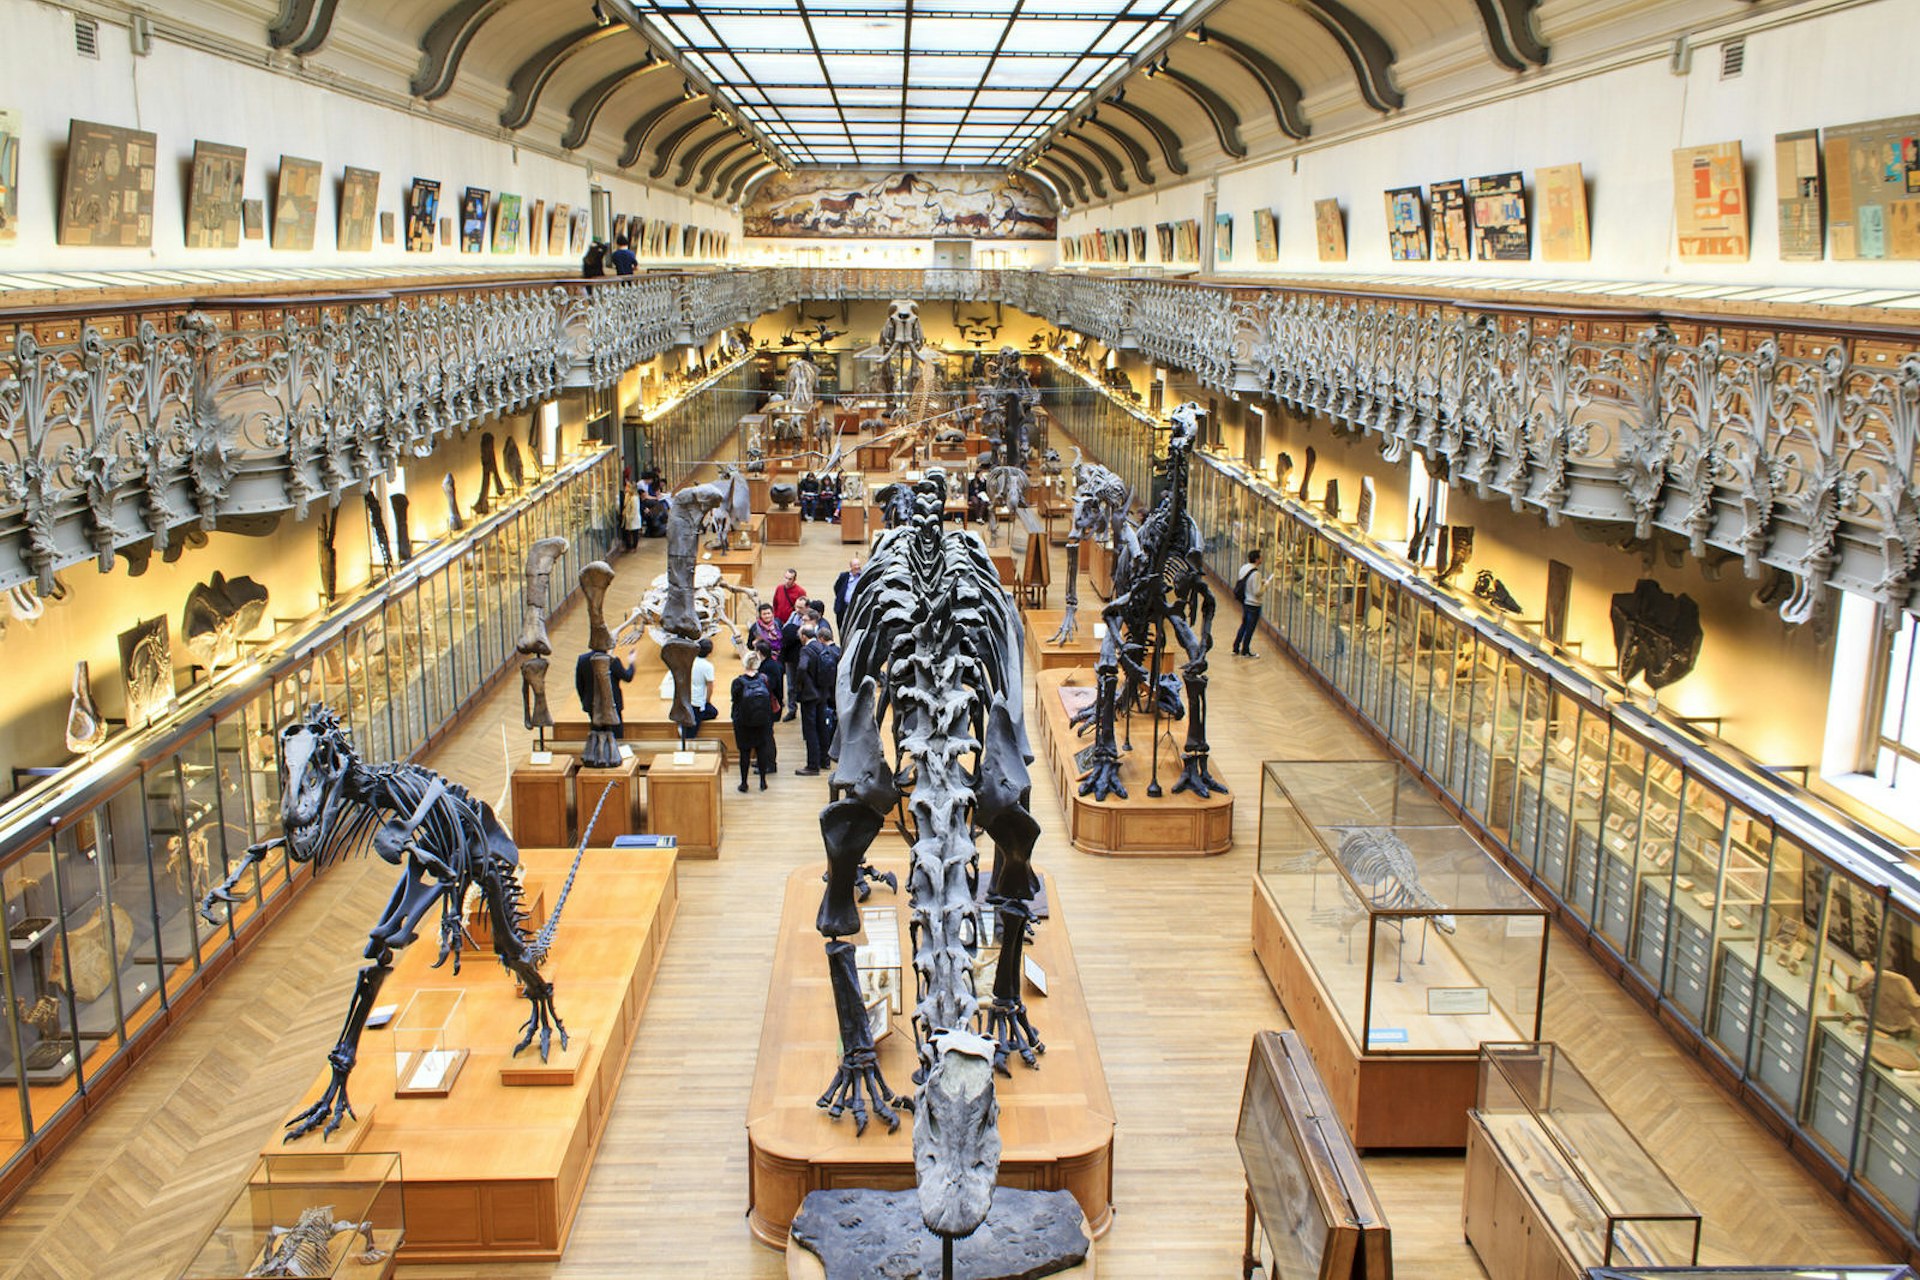 A long hall is filled with dinosaur skeletons with cabinets hiding other treasures lining the walls